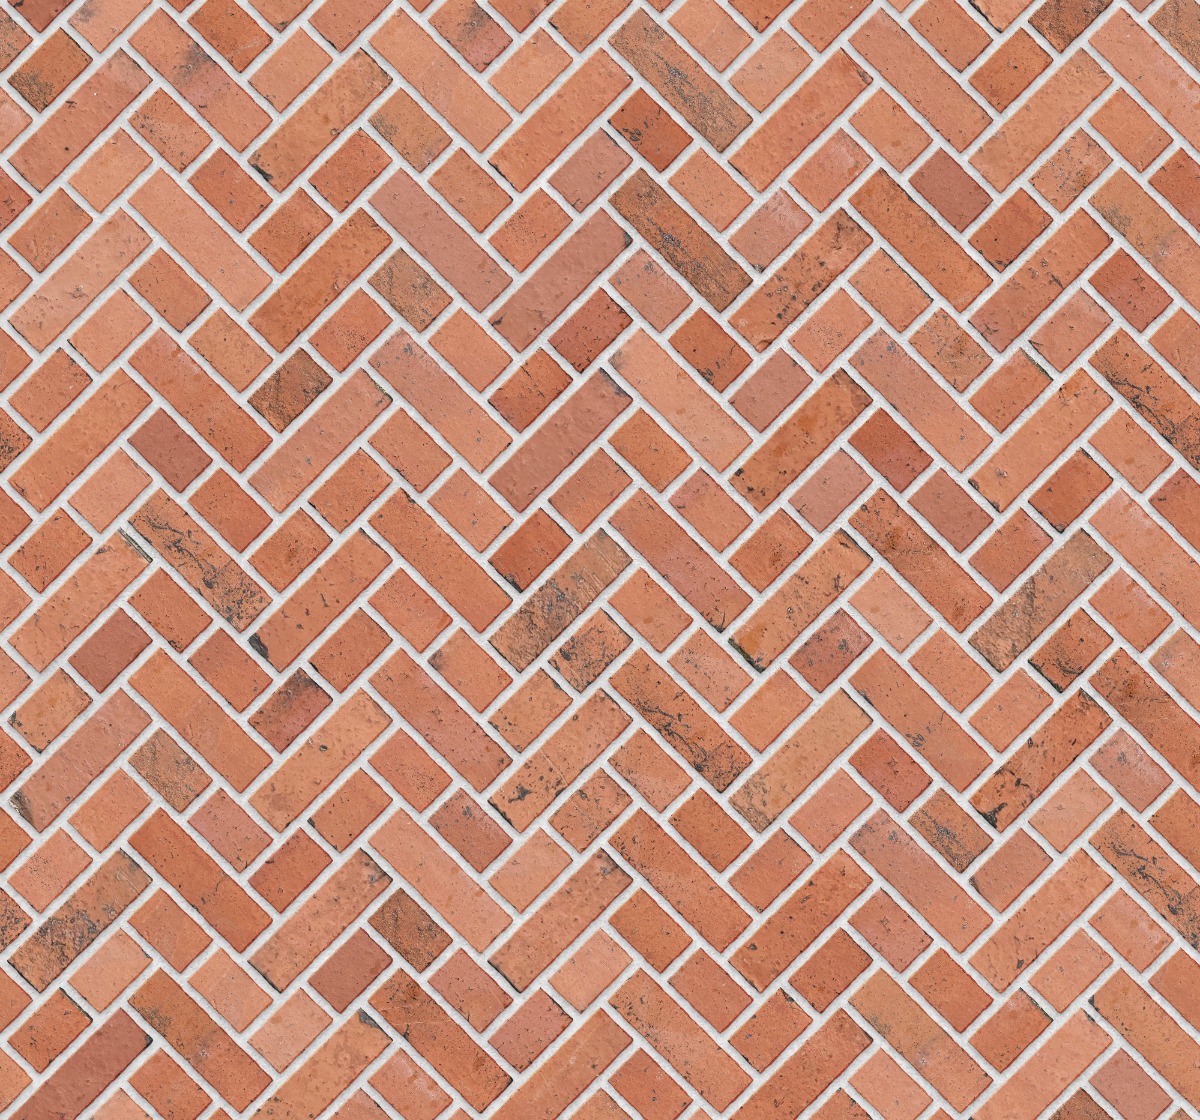 A seamless brick texture with pilotage units arranged in a Broken Herringbone pattern